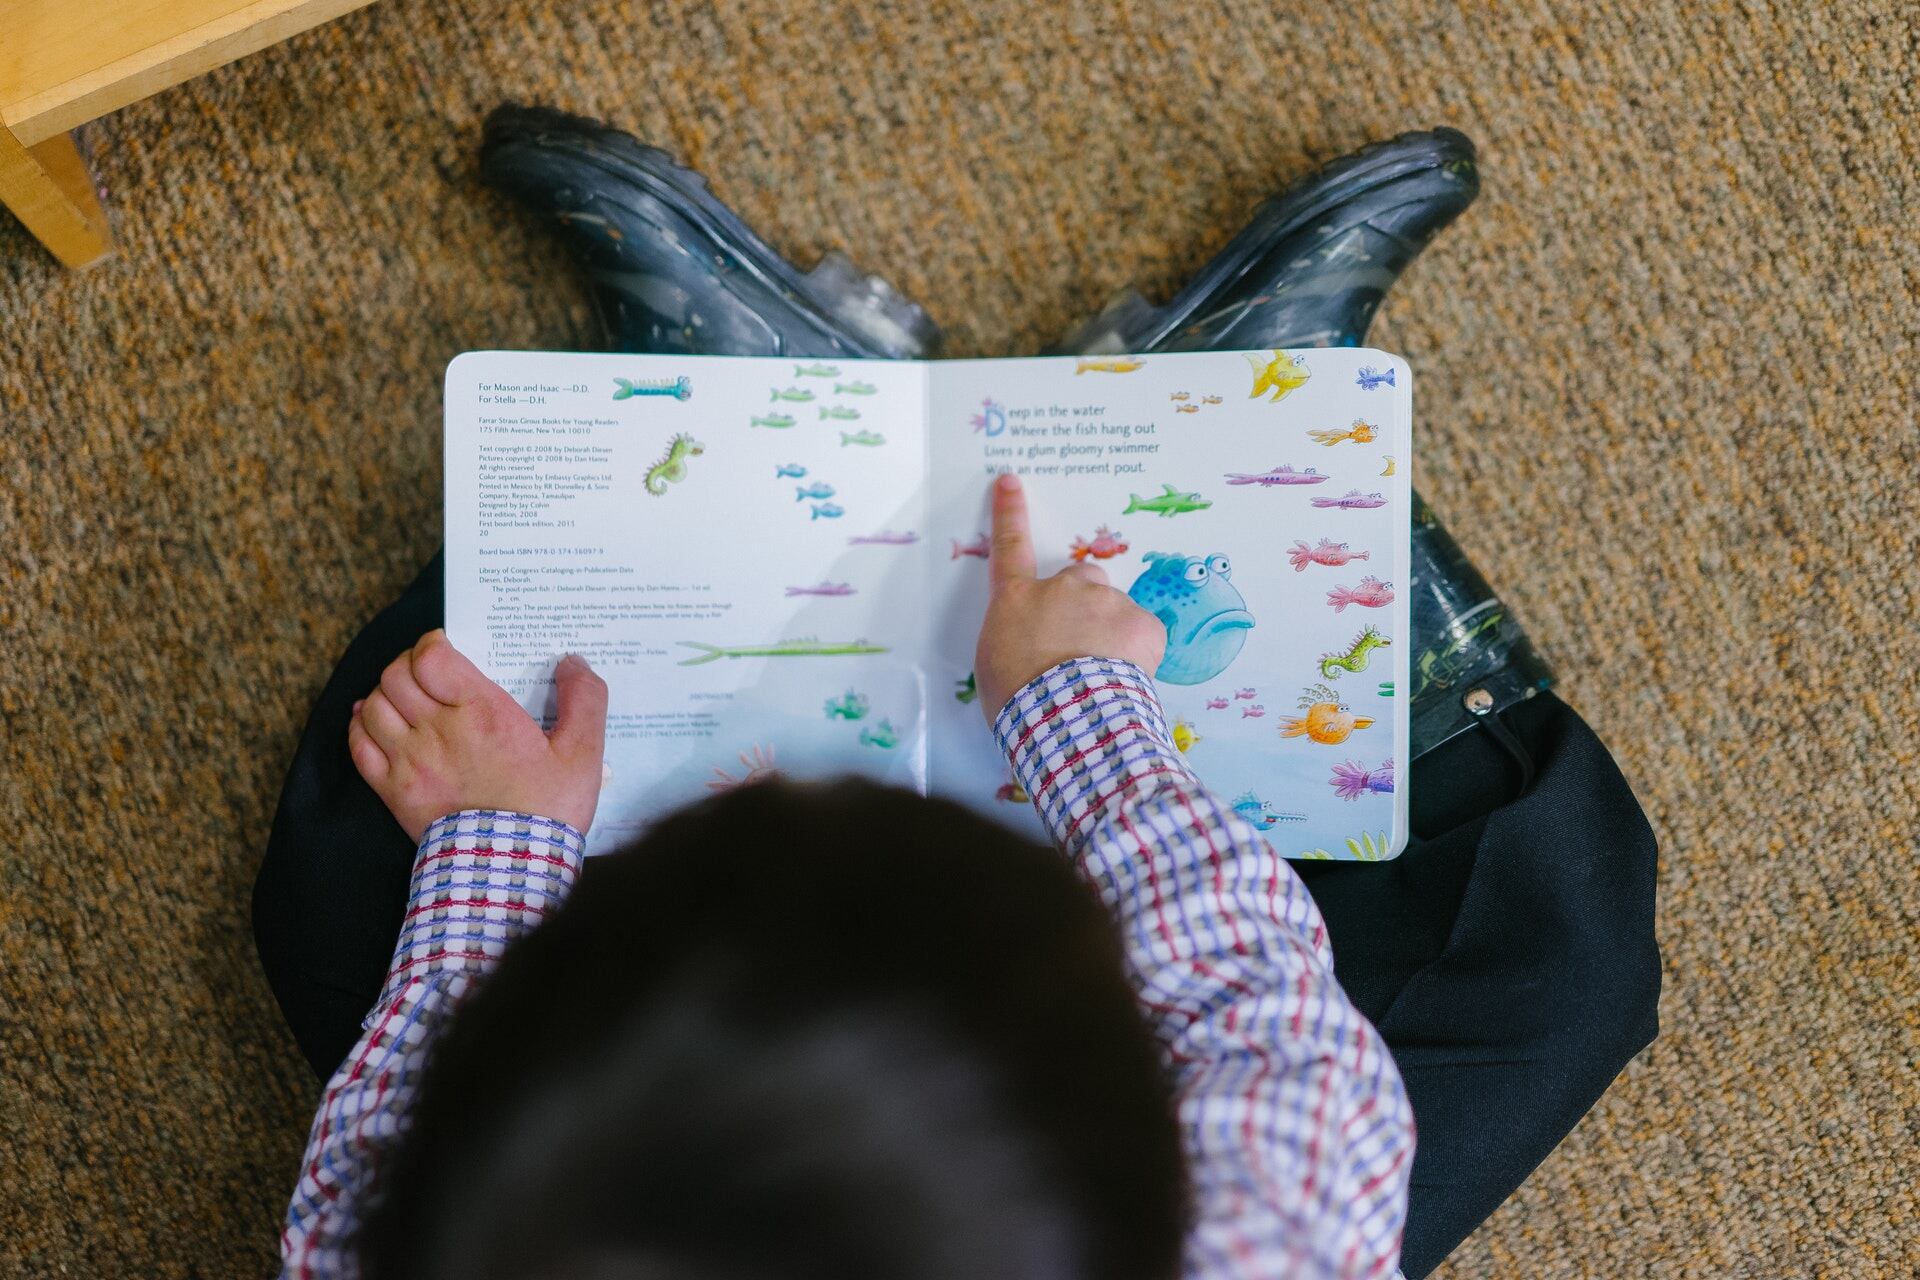 Overhead shot of a young child reading an illustrated children’s book about fish.